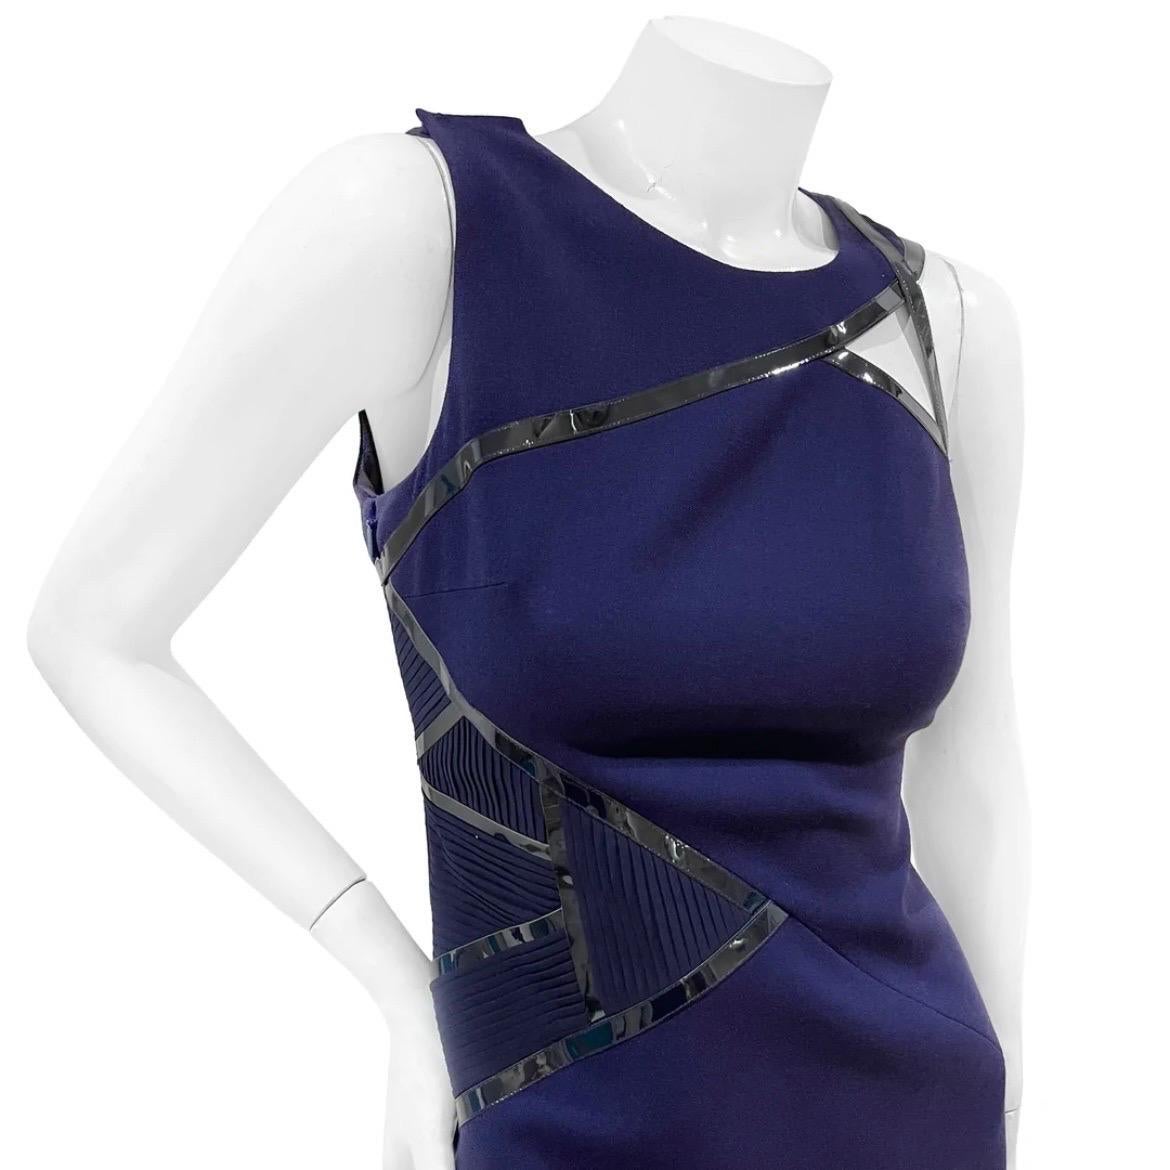 Purple Cut-Out Asymmetrical Dress by Versace
Fall / Winter 2010
Made in Italy
Dark purple
Asymmetrical cut out detail on front and back of dress
Pleated geometric fabric detail on side of dress
Black strip lining 
Top shoulder sleeve has clasp